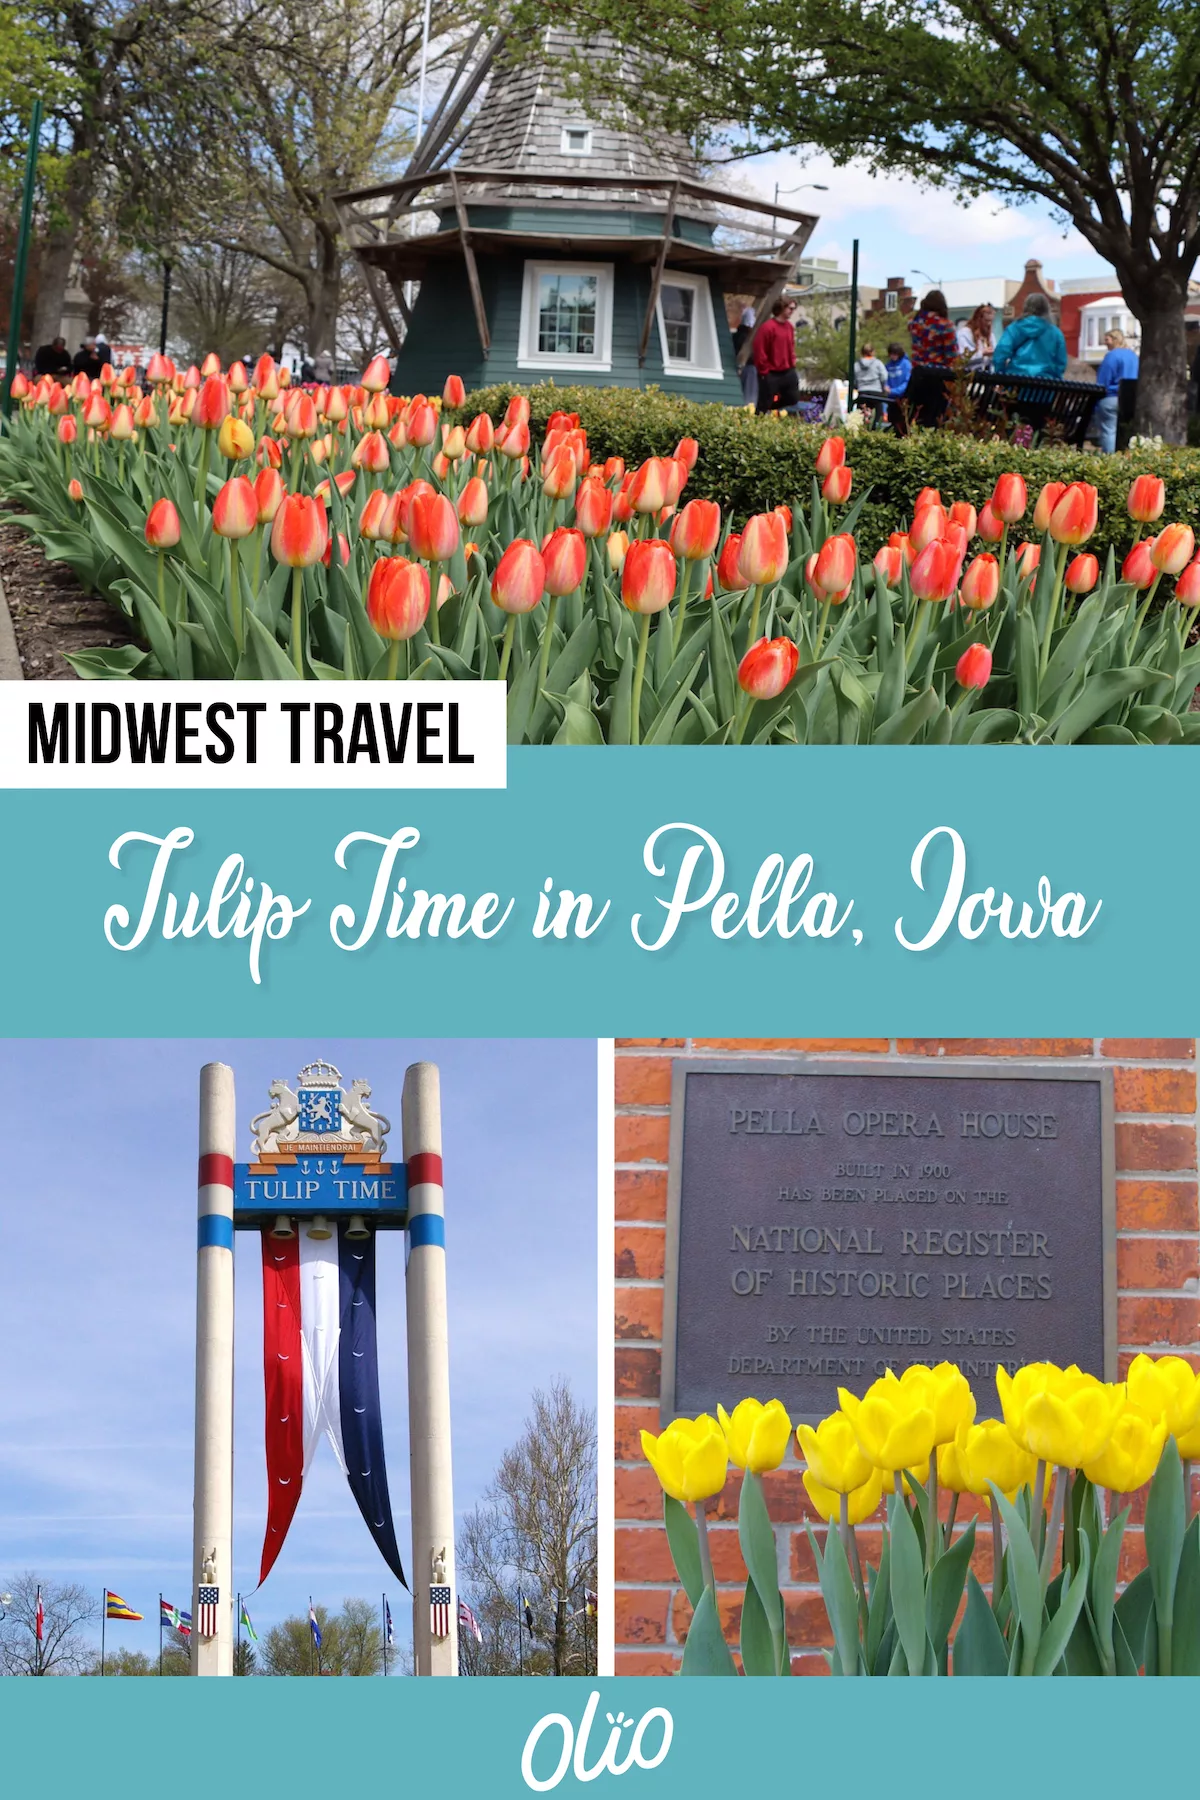 There are few springtime events that are more fun than Tulip Time in Pella, Iowa. There's truly no better way to welcome warmer weather back to the Midwest than with thousands of colorful blooms. Each year during the first weekend in May, Pella welcomes thousands of visitors looking for 300,000+ colorful tulips, Dutch attire, live music, traditional dancing and delicious food.